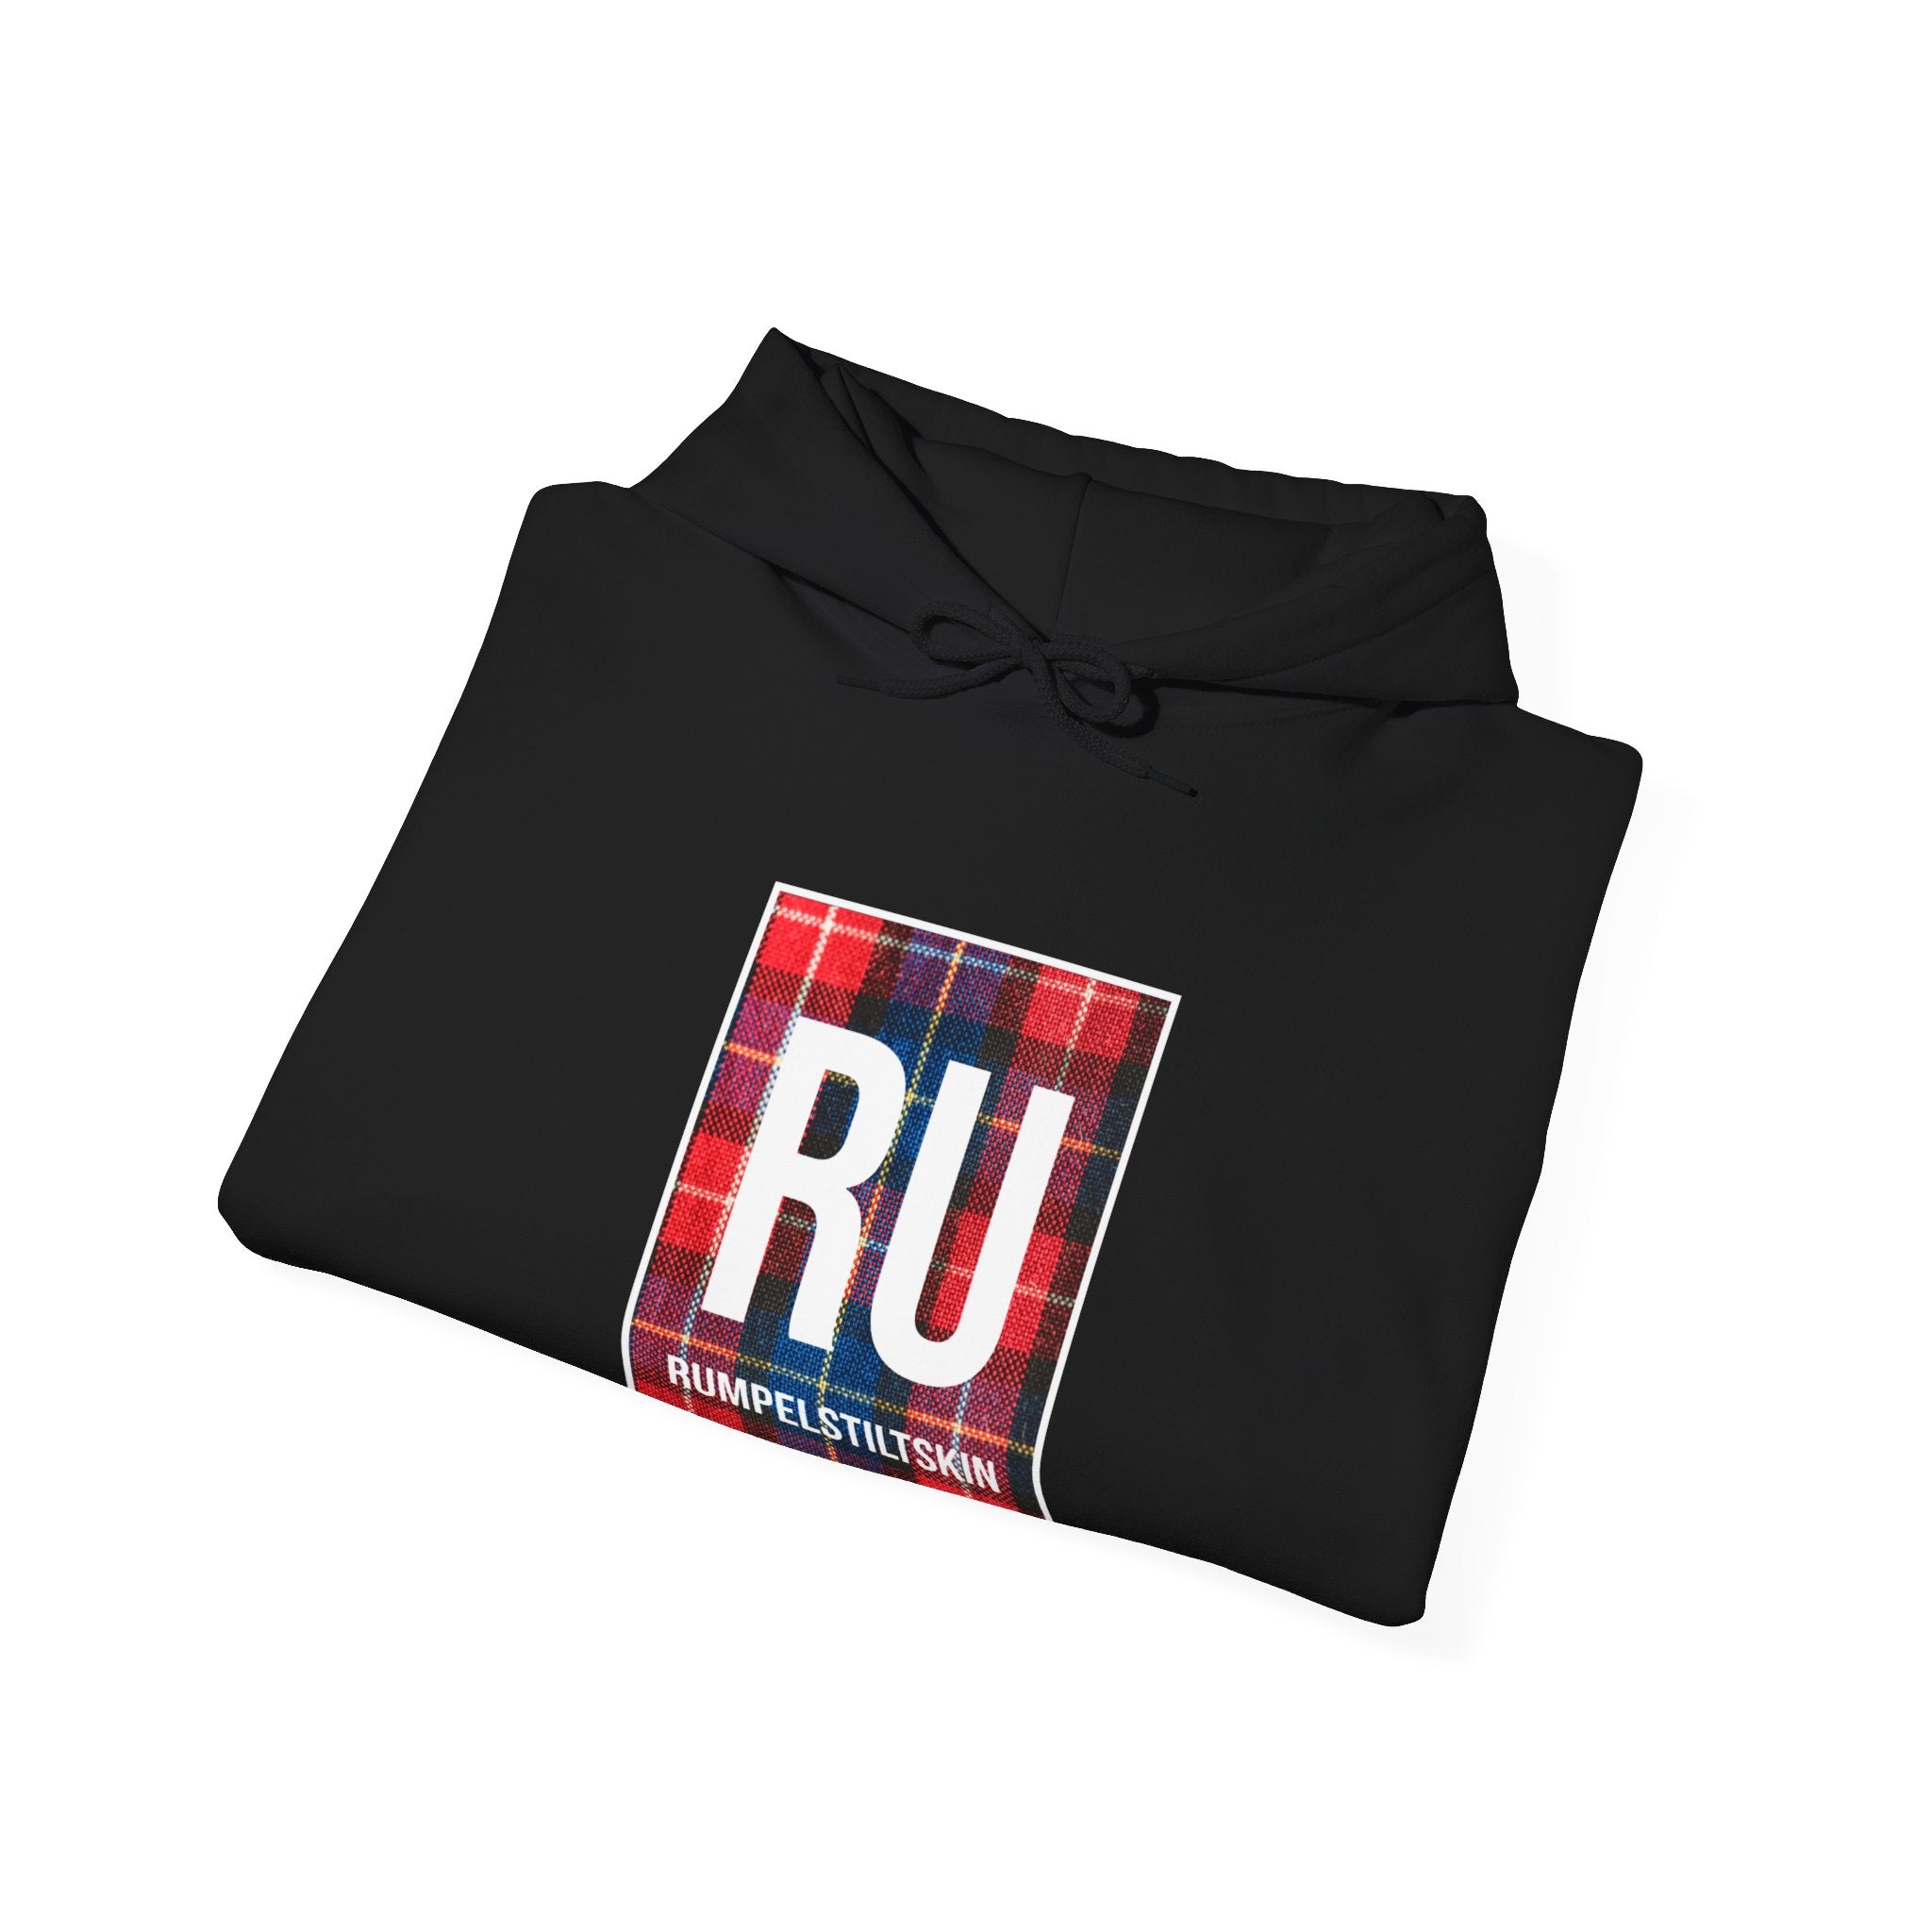 The RU - Hooded Sweatshirt features a sleek black design with the letters "RU" and the name "Rumpelstiltskin" in a plaid pattern on the front, offering ultimate comfort and effortless style.